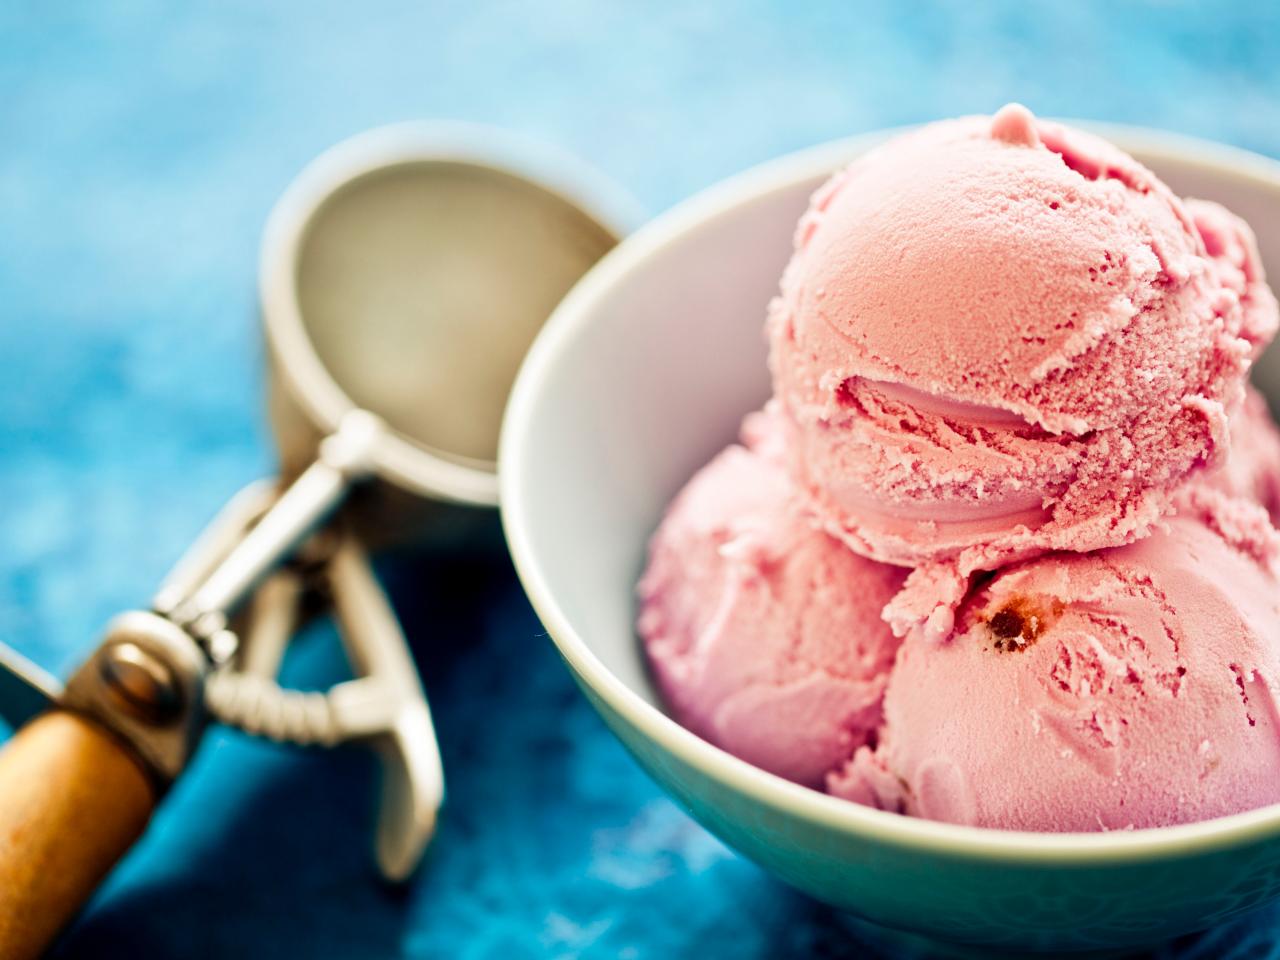 How to Make Ice Cream with an Ice Cream Maker, Cooking School